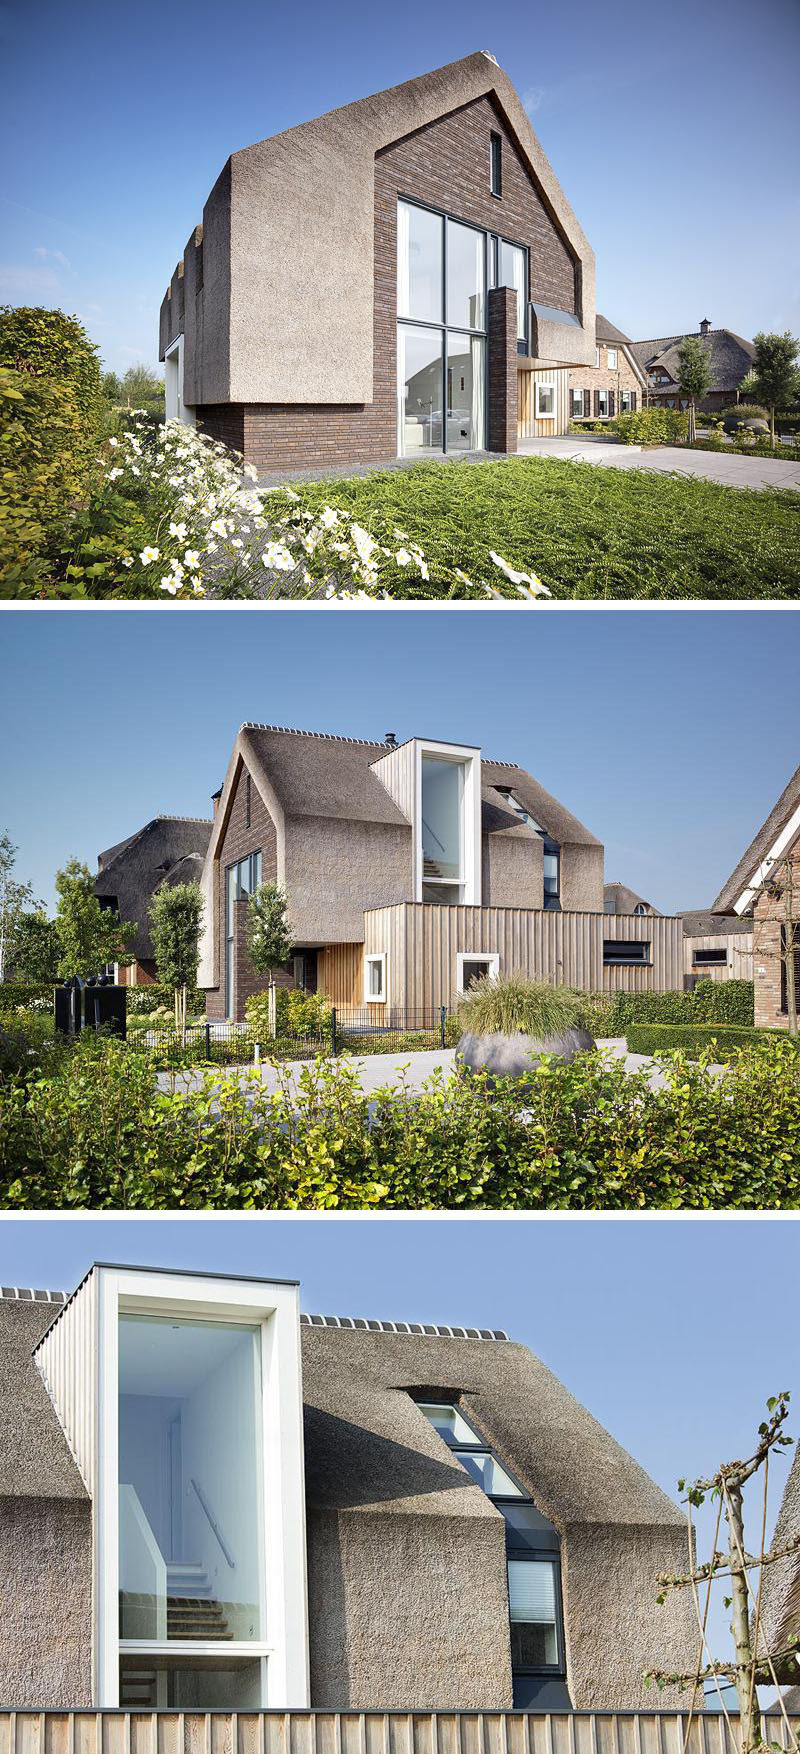 12 Examples Of Modern Houses And Buildings That Have A Thatched Roof // Traditional materials like brick, wood, and thatch used for the exterior, mix the old with the new on this modern family home.